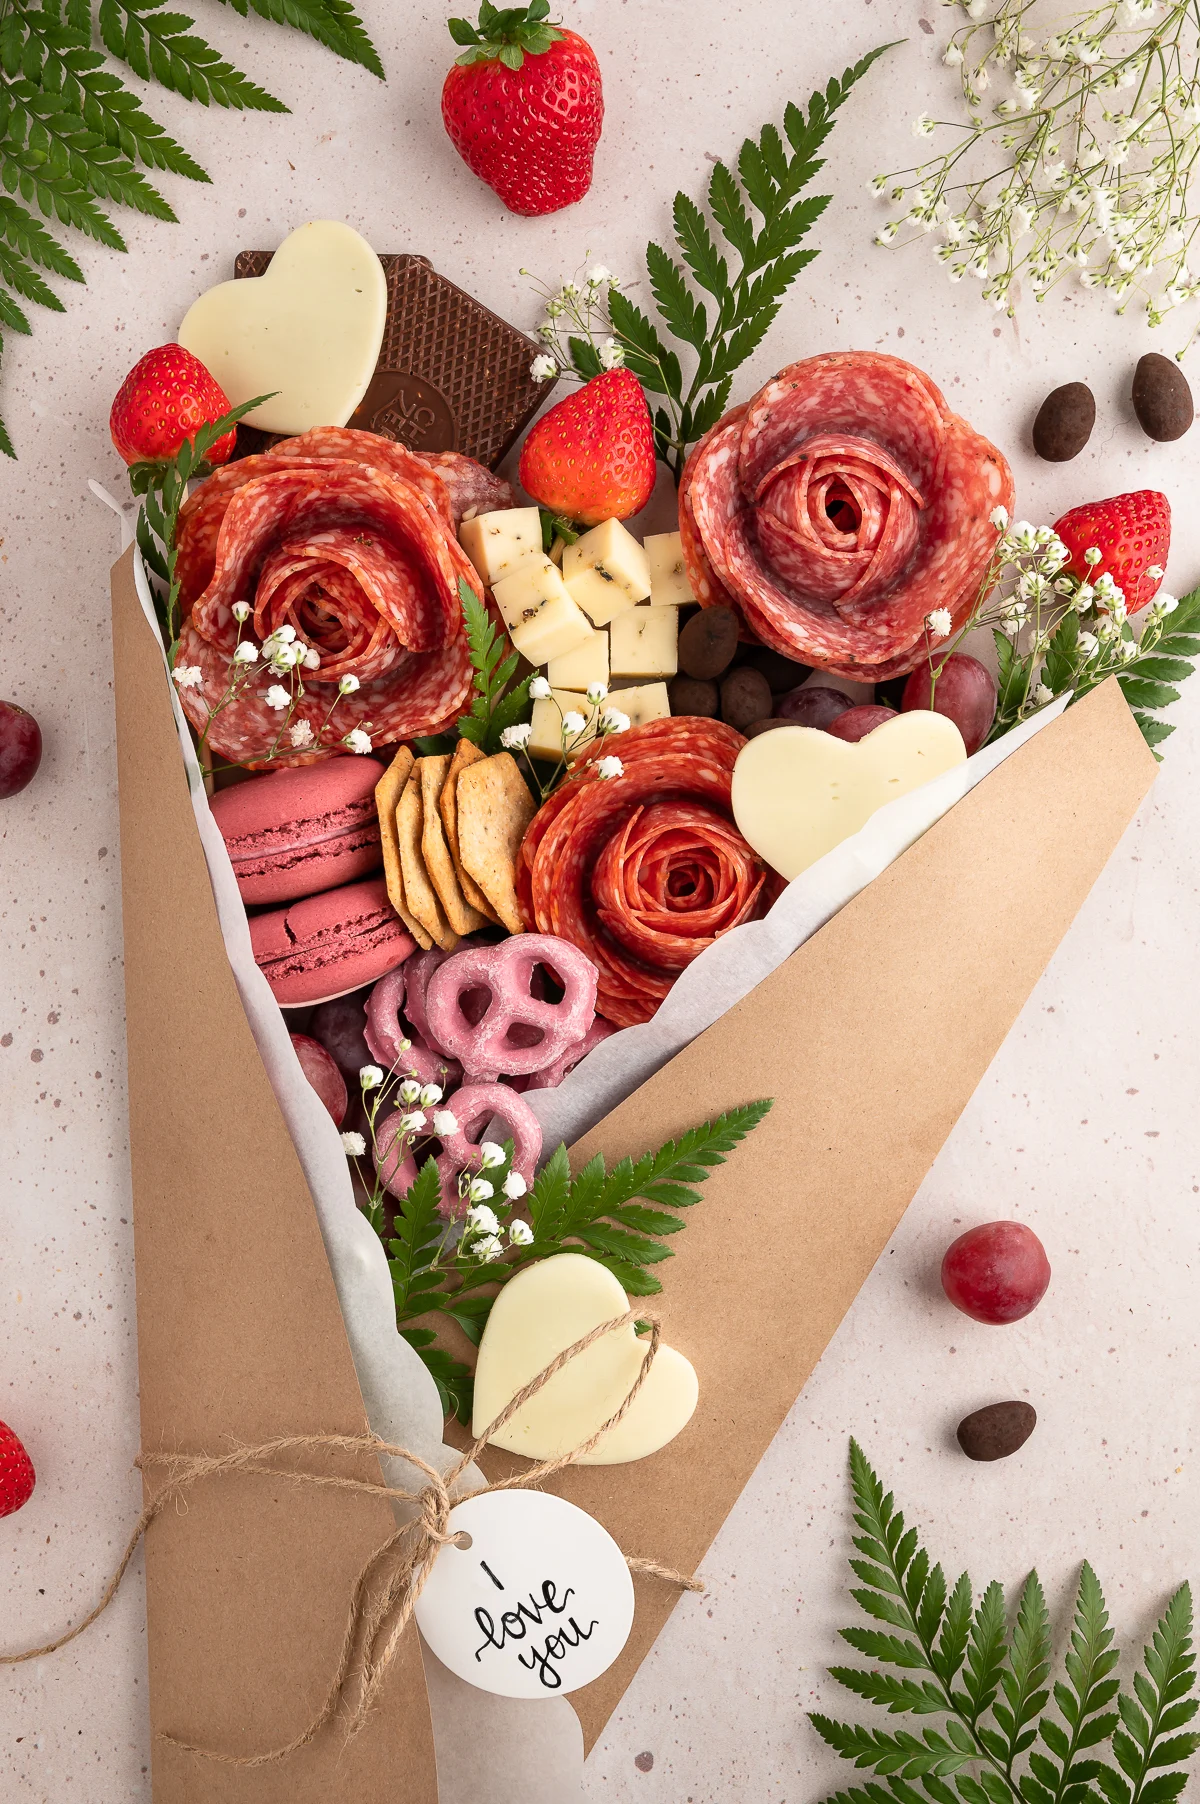 charcuterie bouquet to celebrate new year's eve or a romantic date night in